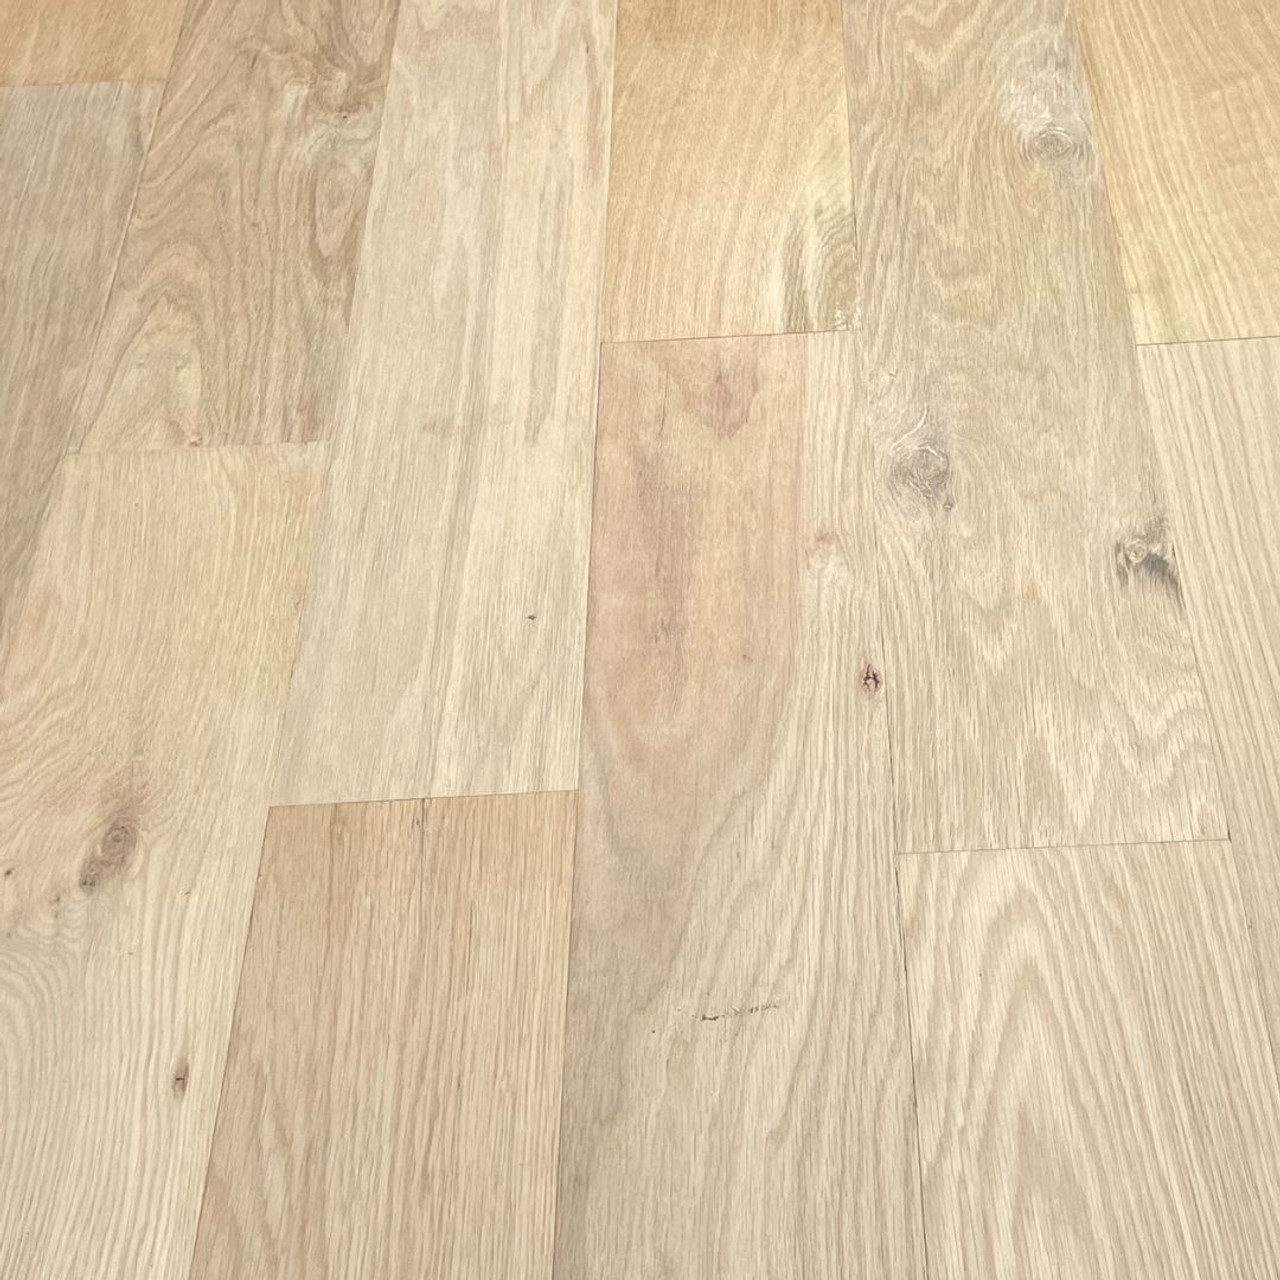 Hapwood White Oak 1/2" 5-ply Mill Crafted Hardwood Flooring (Not Eligible For Free Shipping)